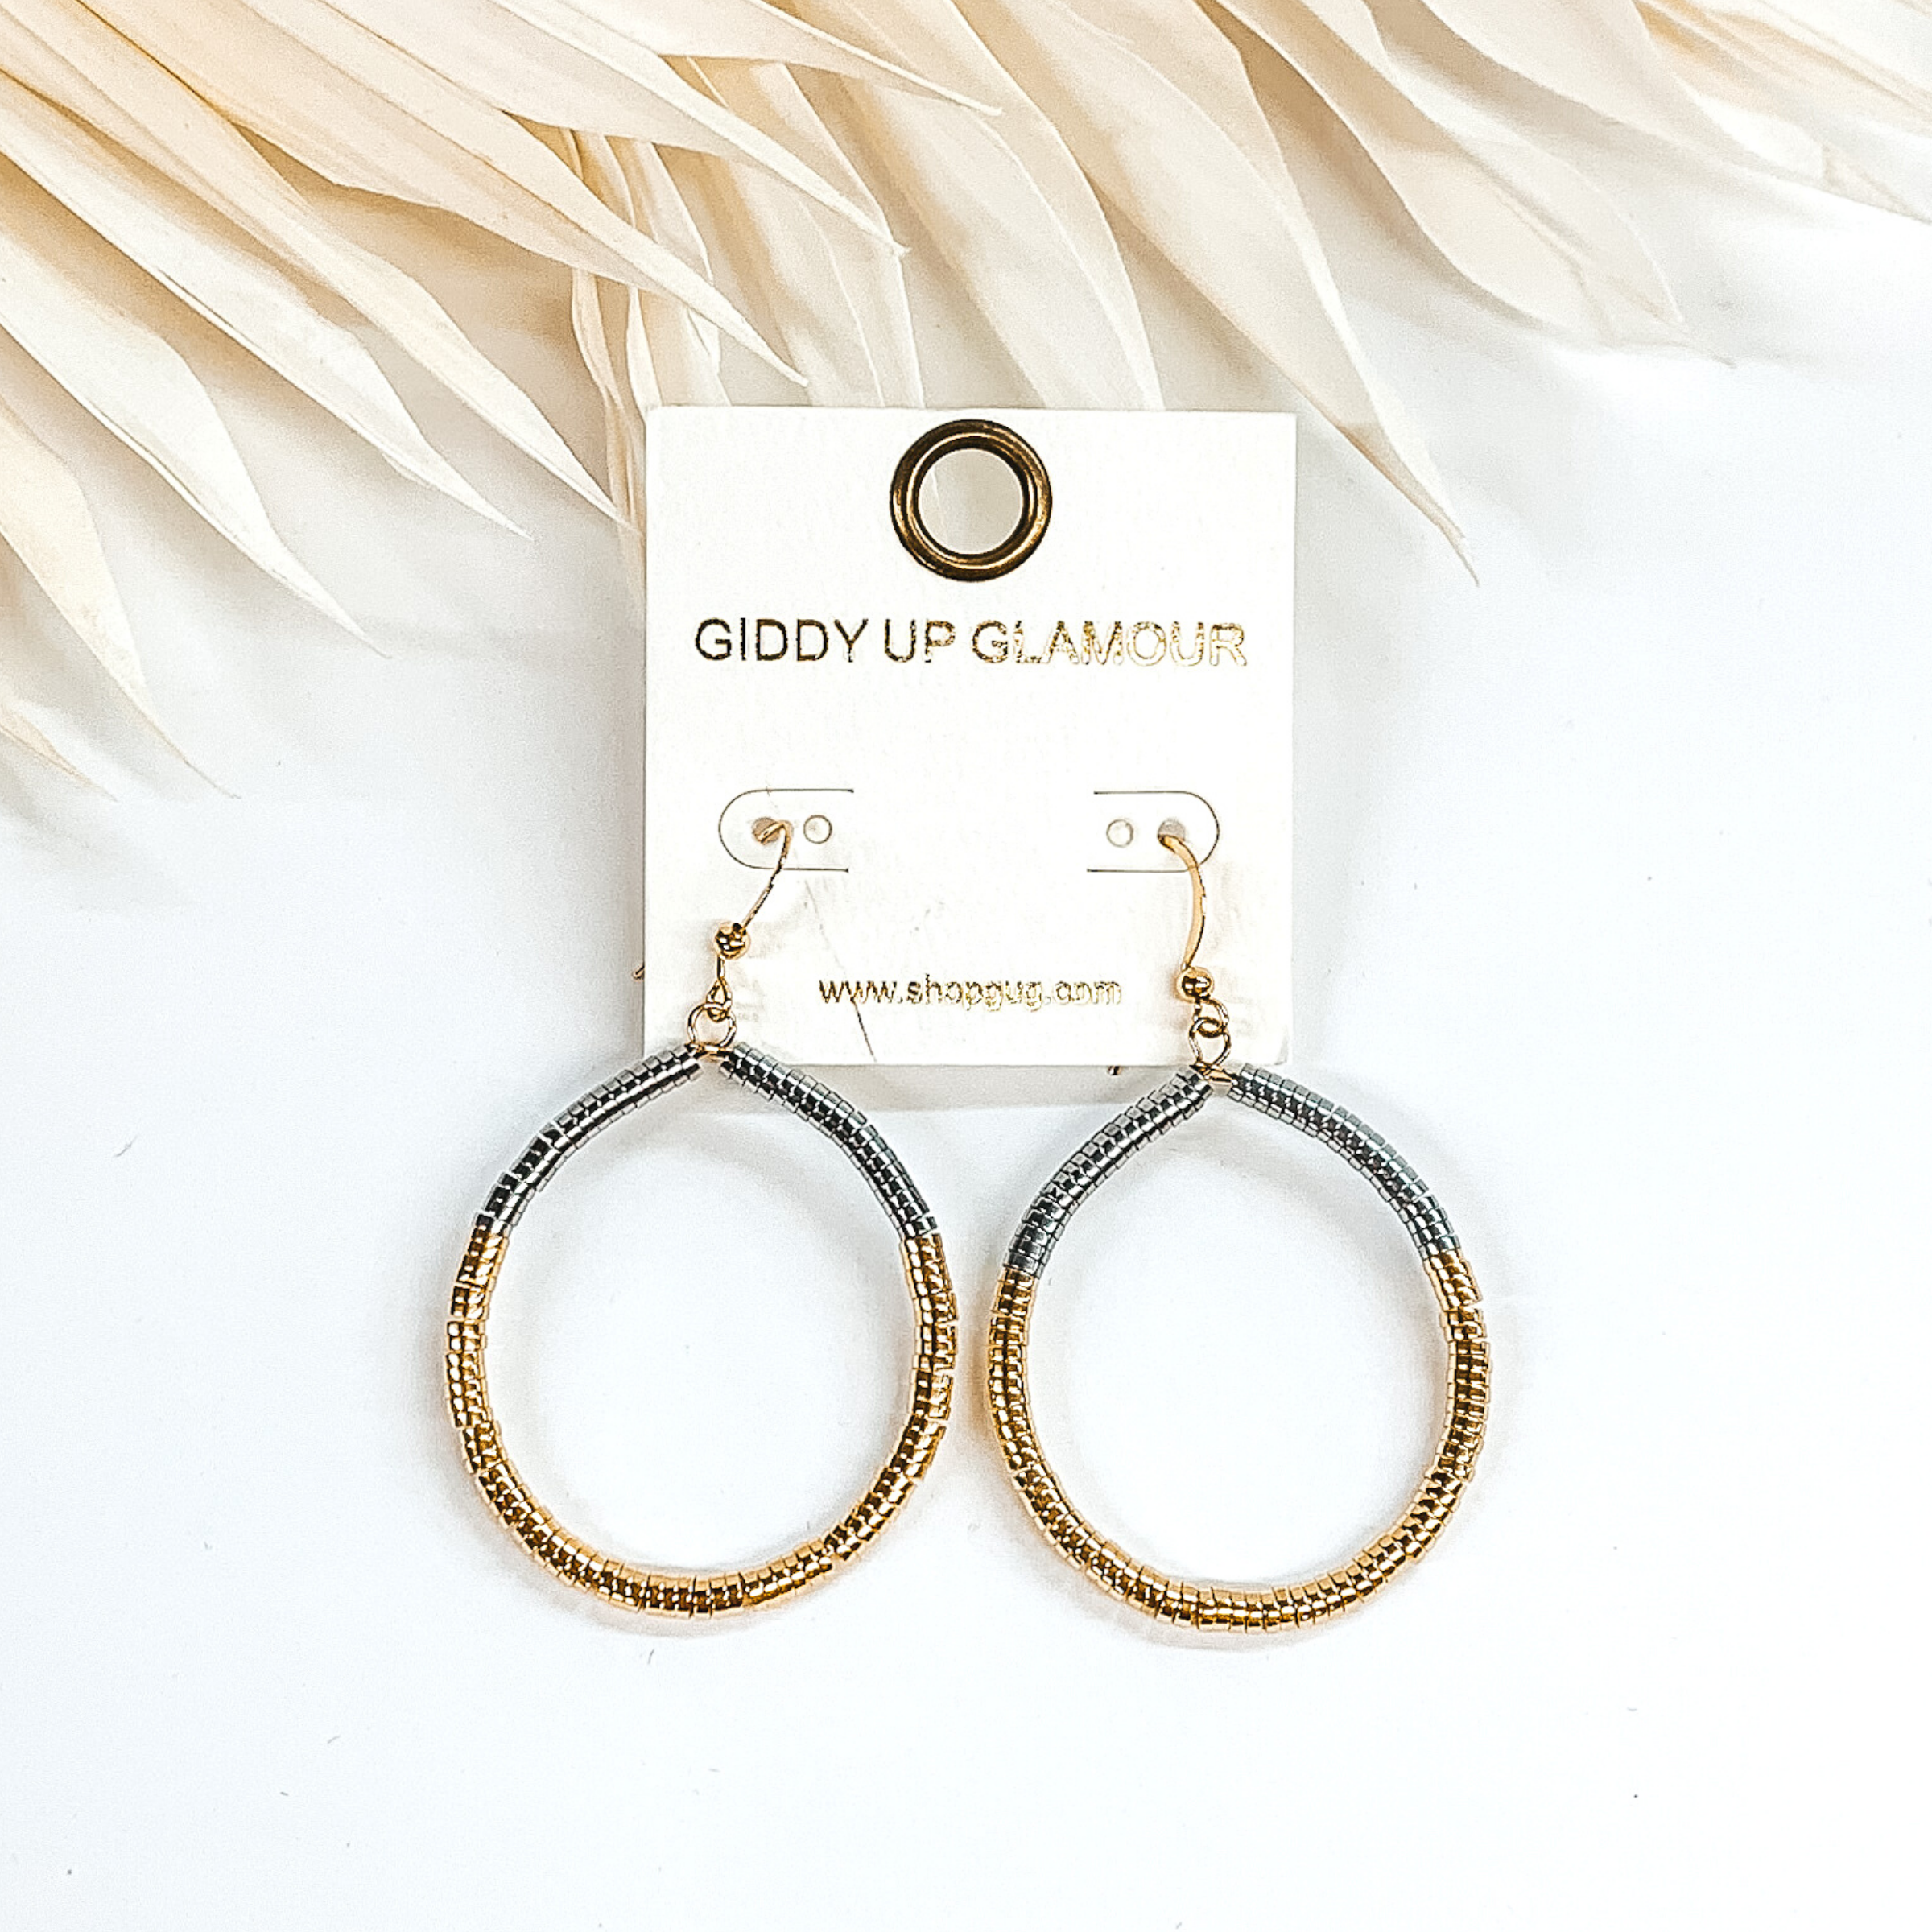 Circle drop disk beaded earrings in gold and silver. These earrings are pictured on a white background with ivory leaves at the top of the picture.